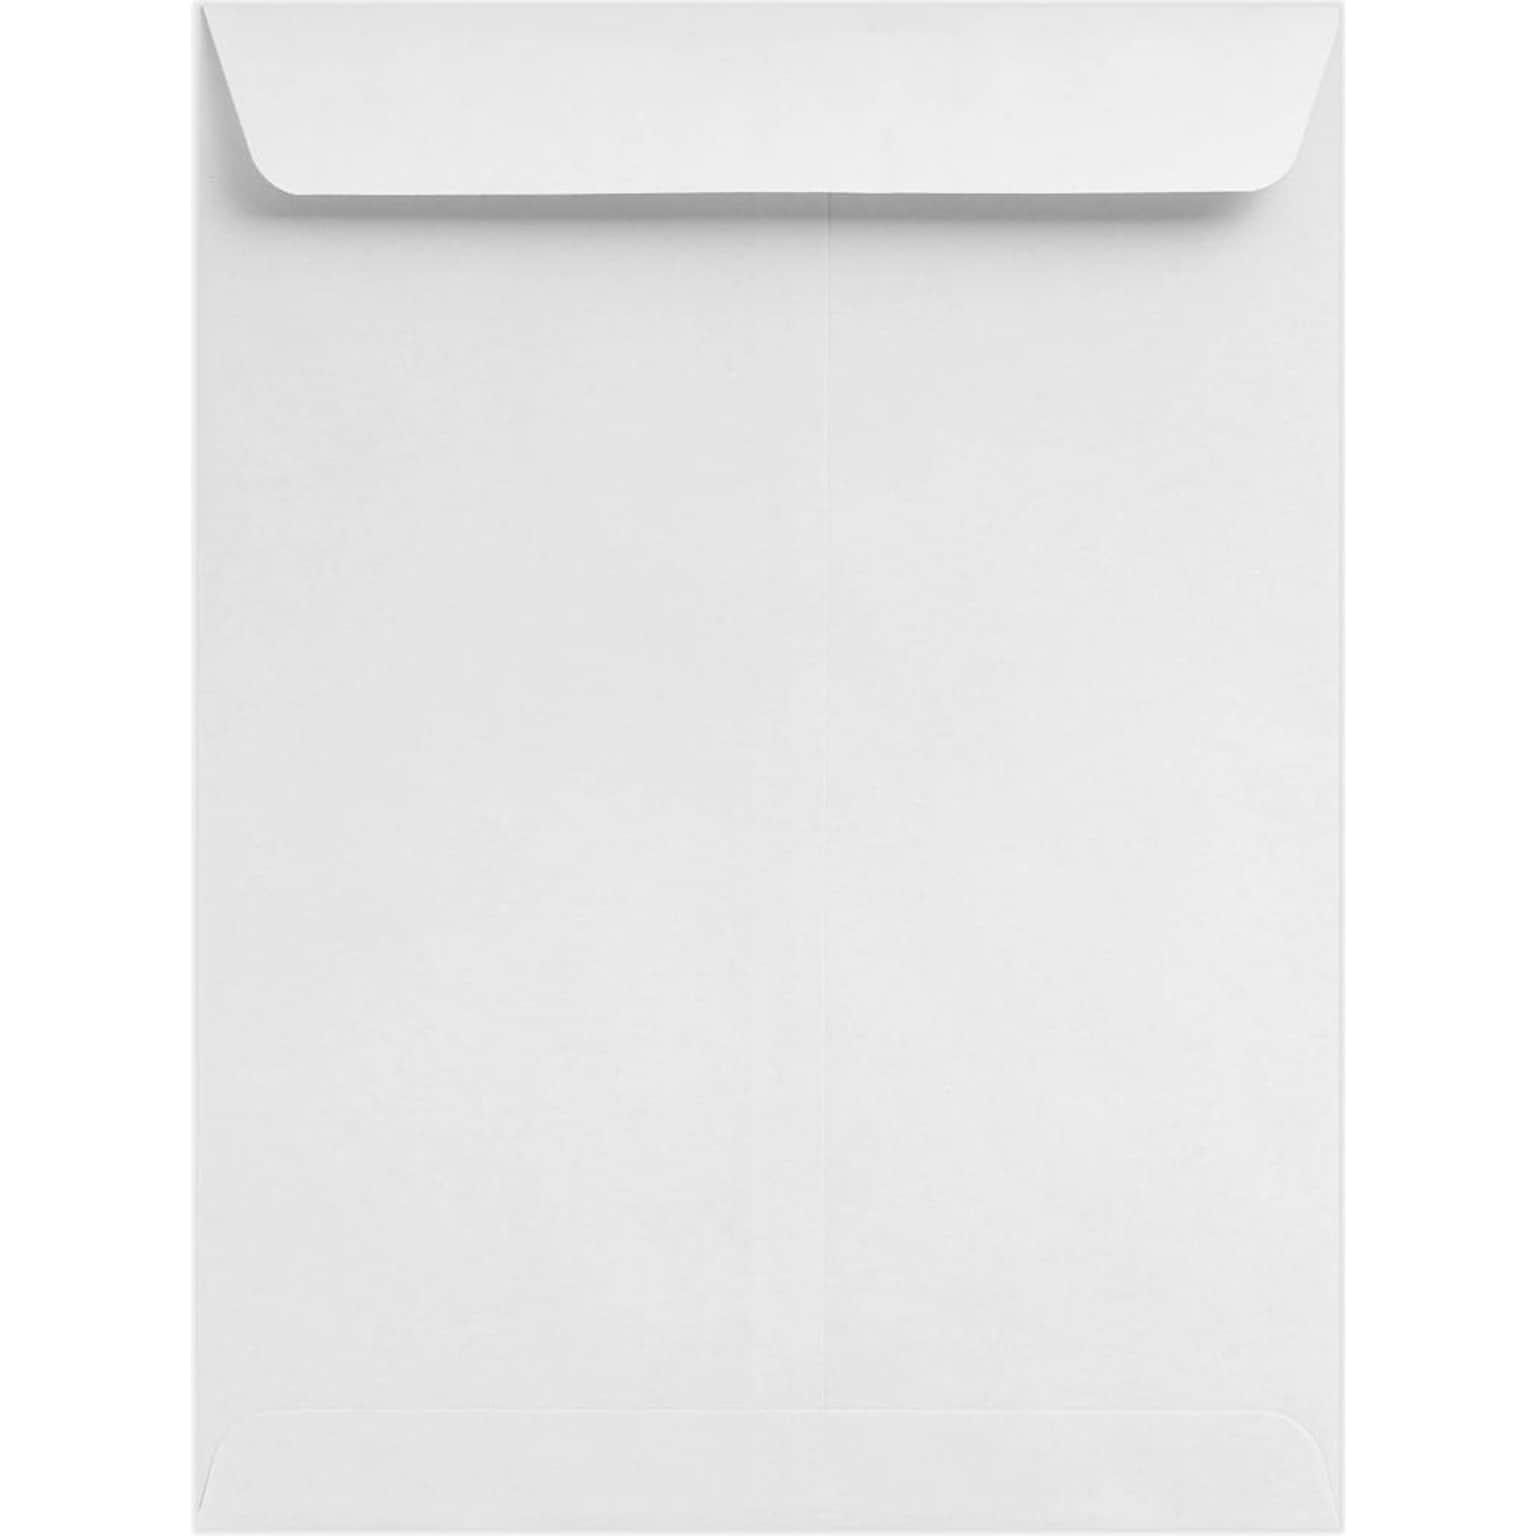 LUX Open End Open End Catalog Envelope, 13 x 17, White, 50/Pack (34073-50)